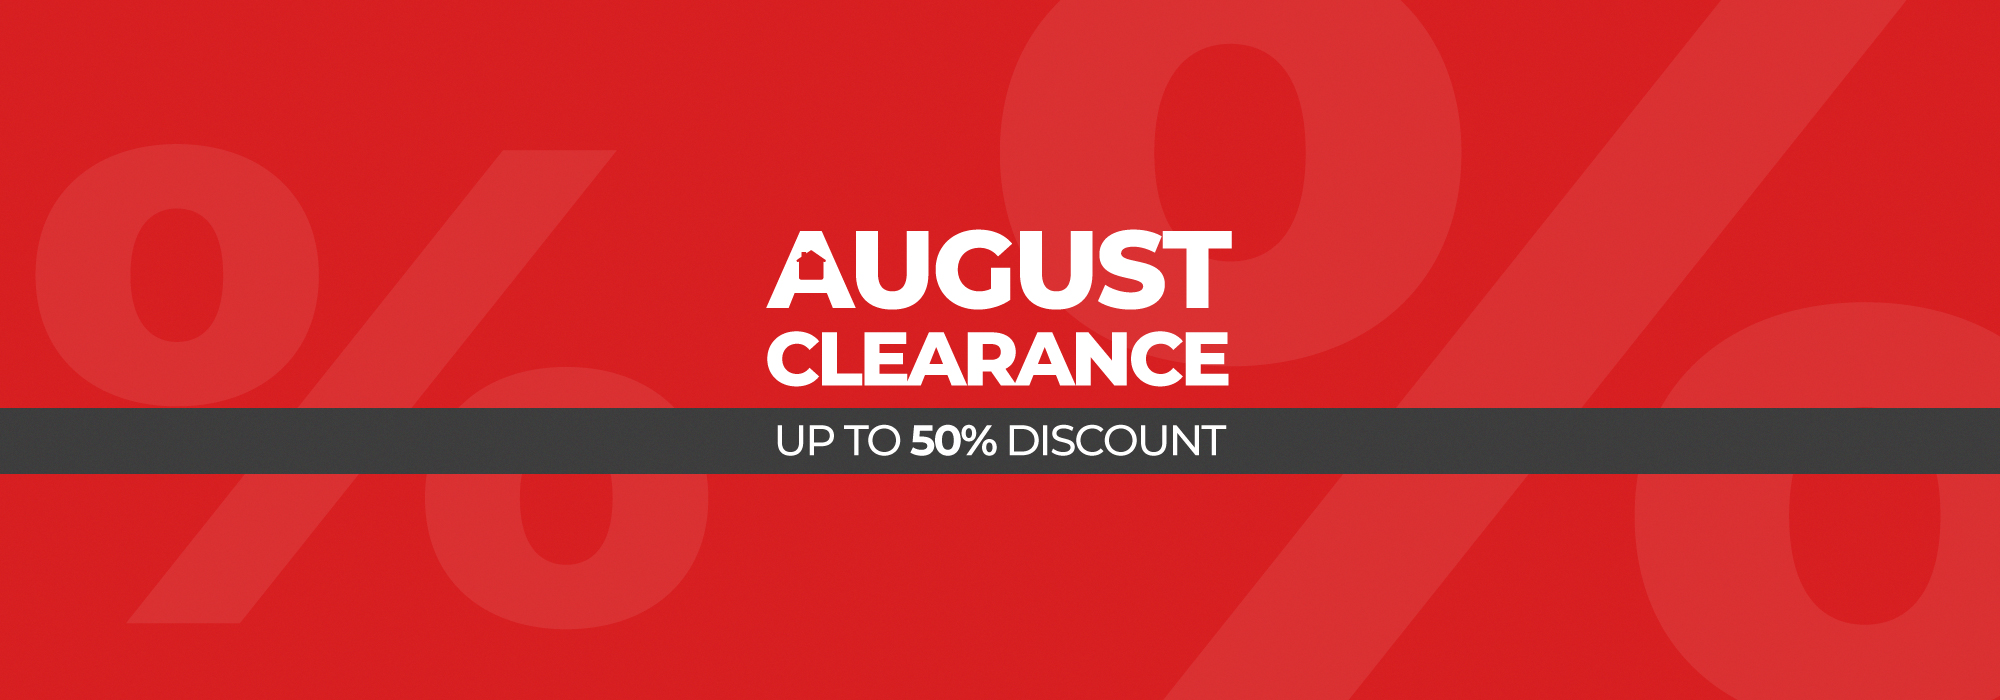 August Clearance